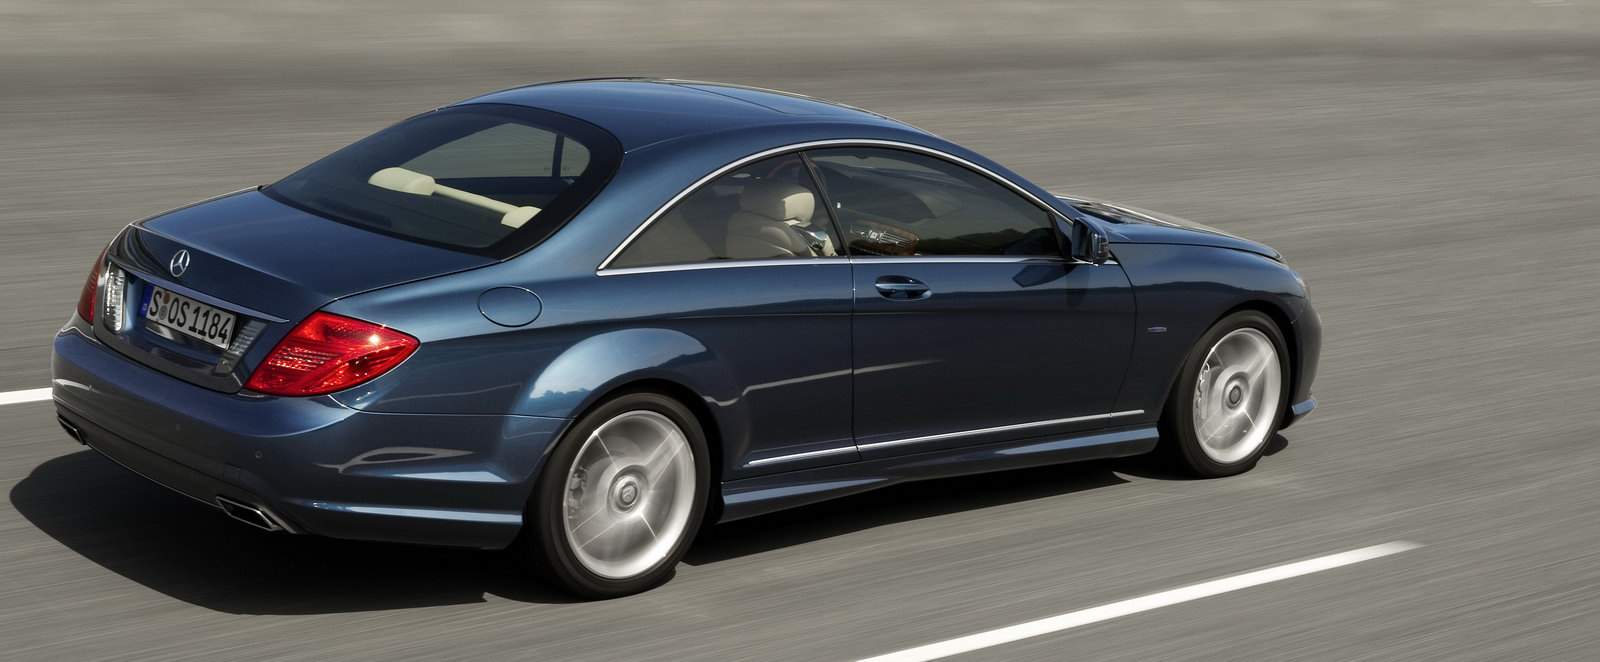 2011 Mercedes-Benz CL-Class Facelift, Keeps Name but gets New Bi-Turbo V8 |  Carscoops